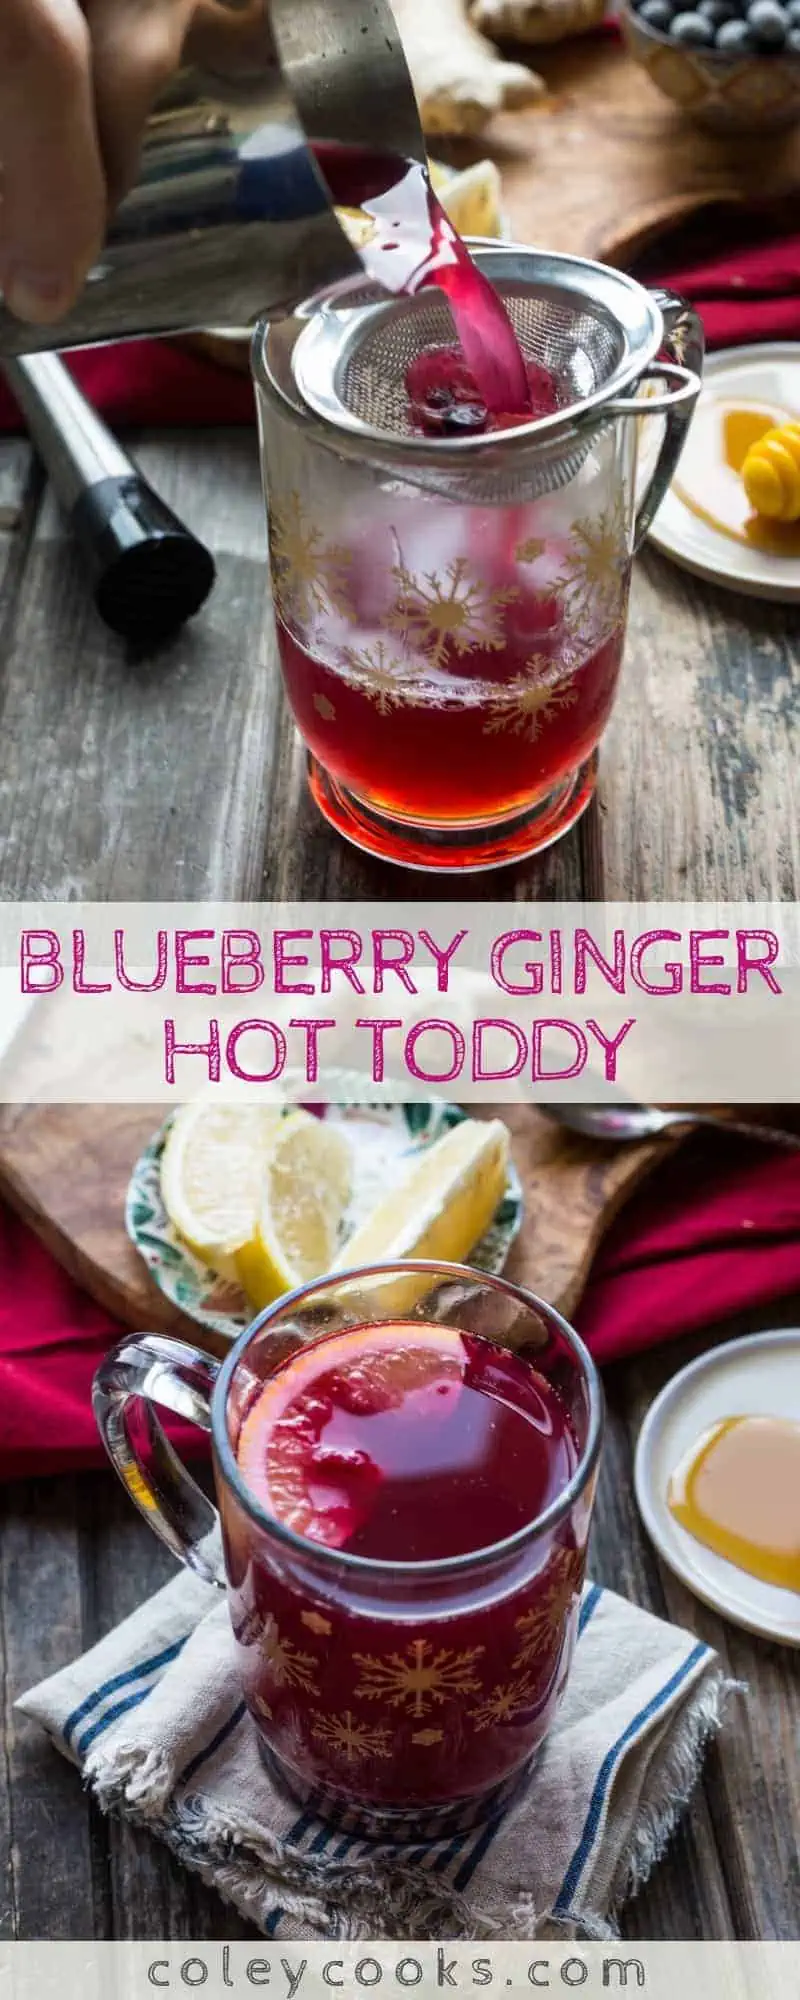 BLUEBERRY GINGER HOT TODDY | A unique twist on the classic hot toddy cocktail. Full of antioxidants and vitamins to keep you healthy while you drink! | #easy #christmas #recipe #cocktail #whiskey #hot #toddy #drink #beverage #booze | ColeyCooks.com